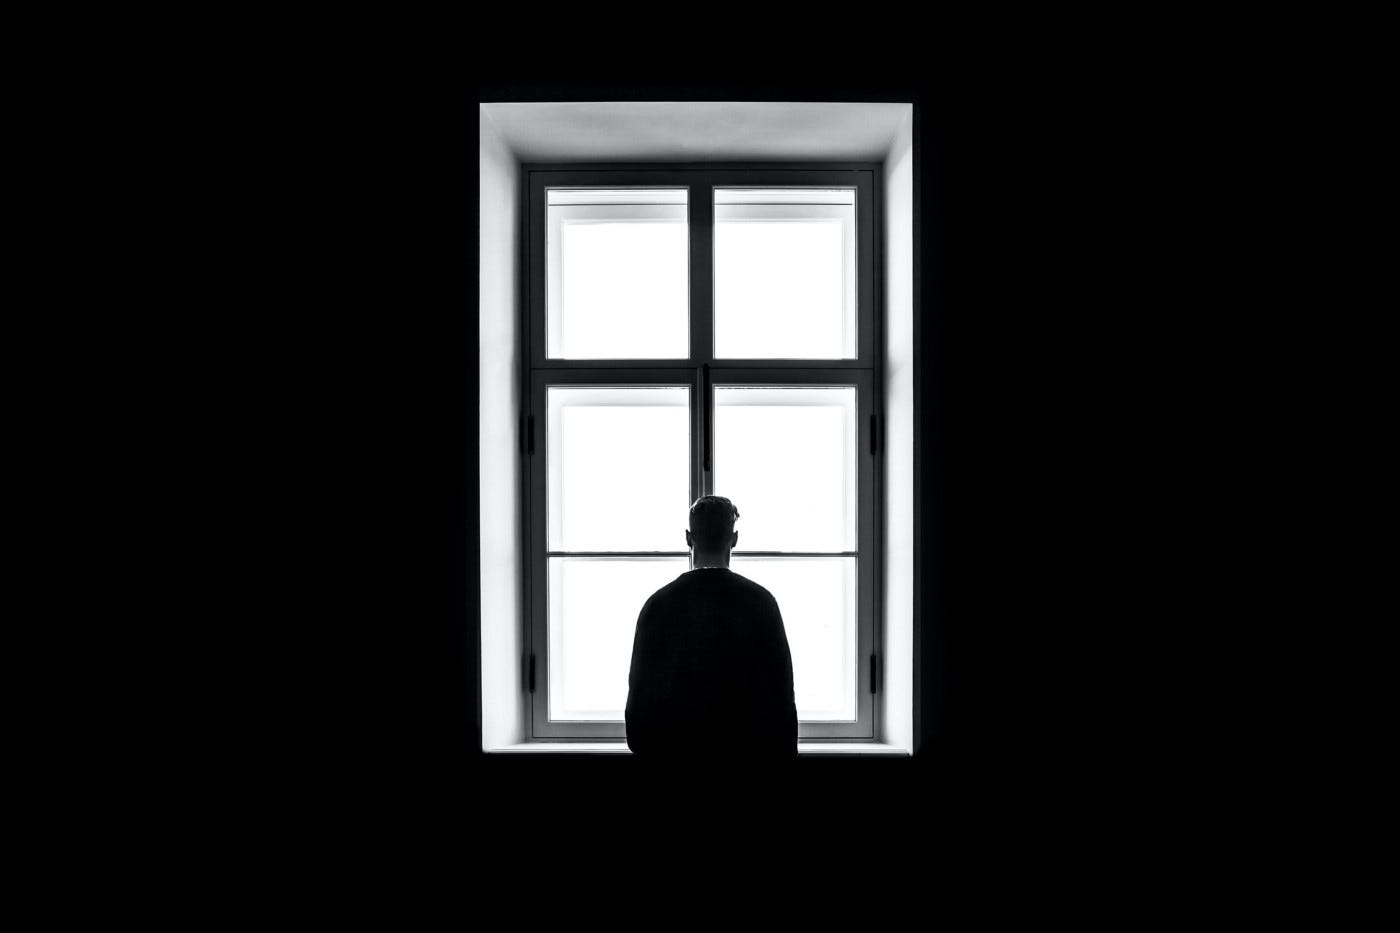 A silhouette of a man looks out of a large window with nothing discernible on the other side